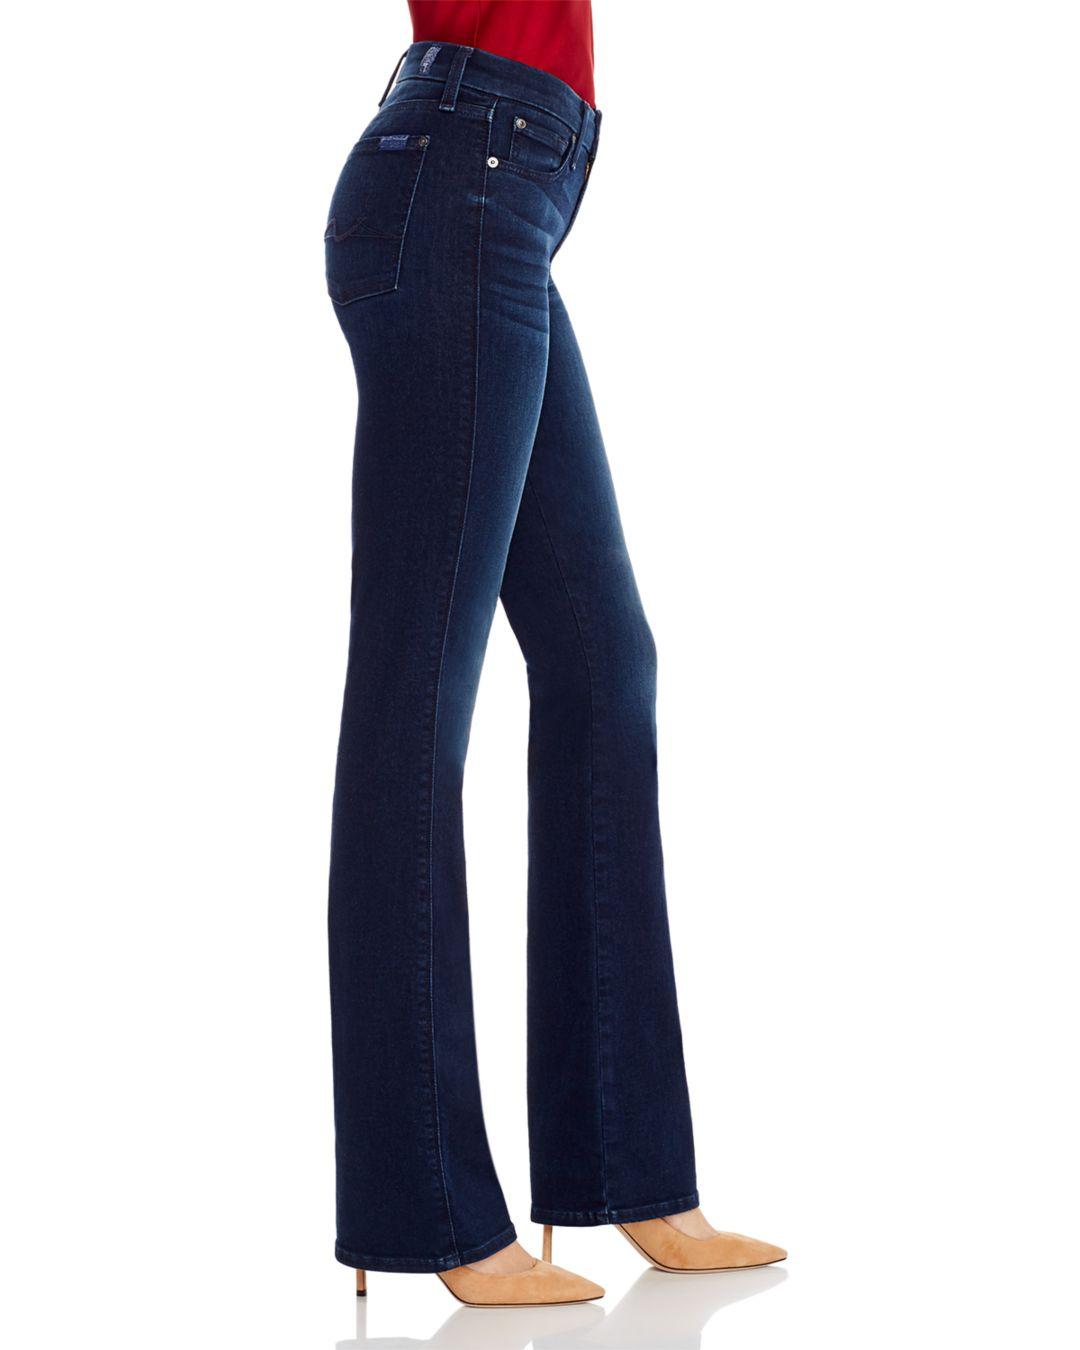 7 for all mankind kimmie jeans for Sale OFF 70%